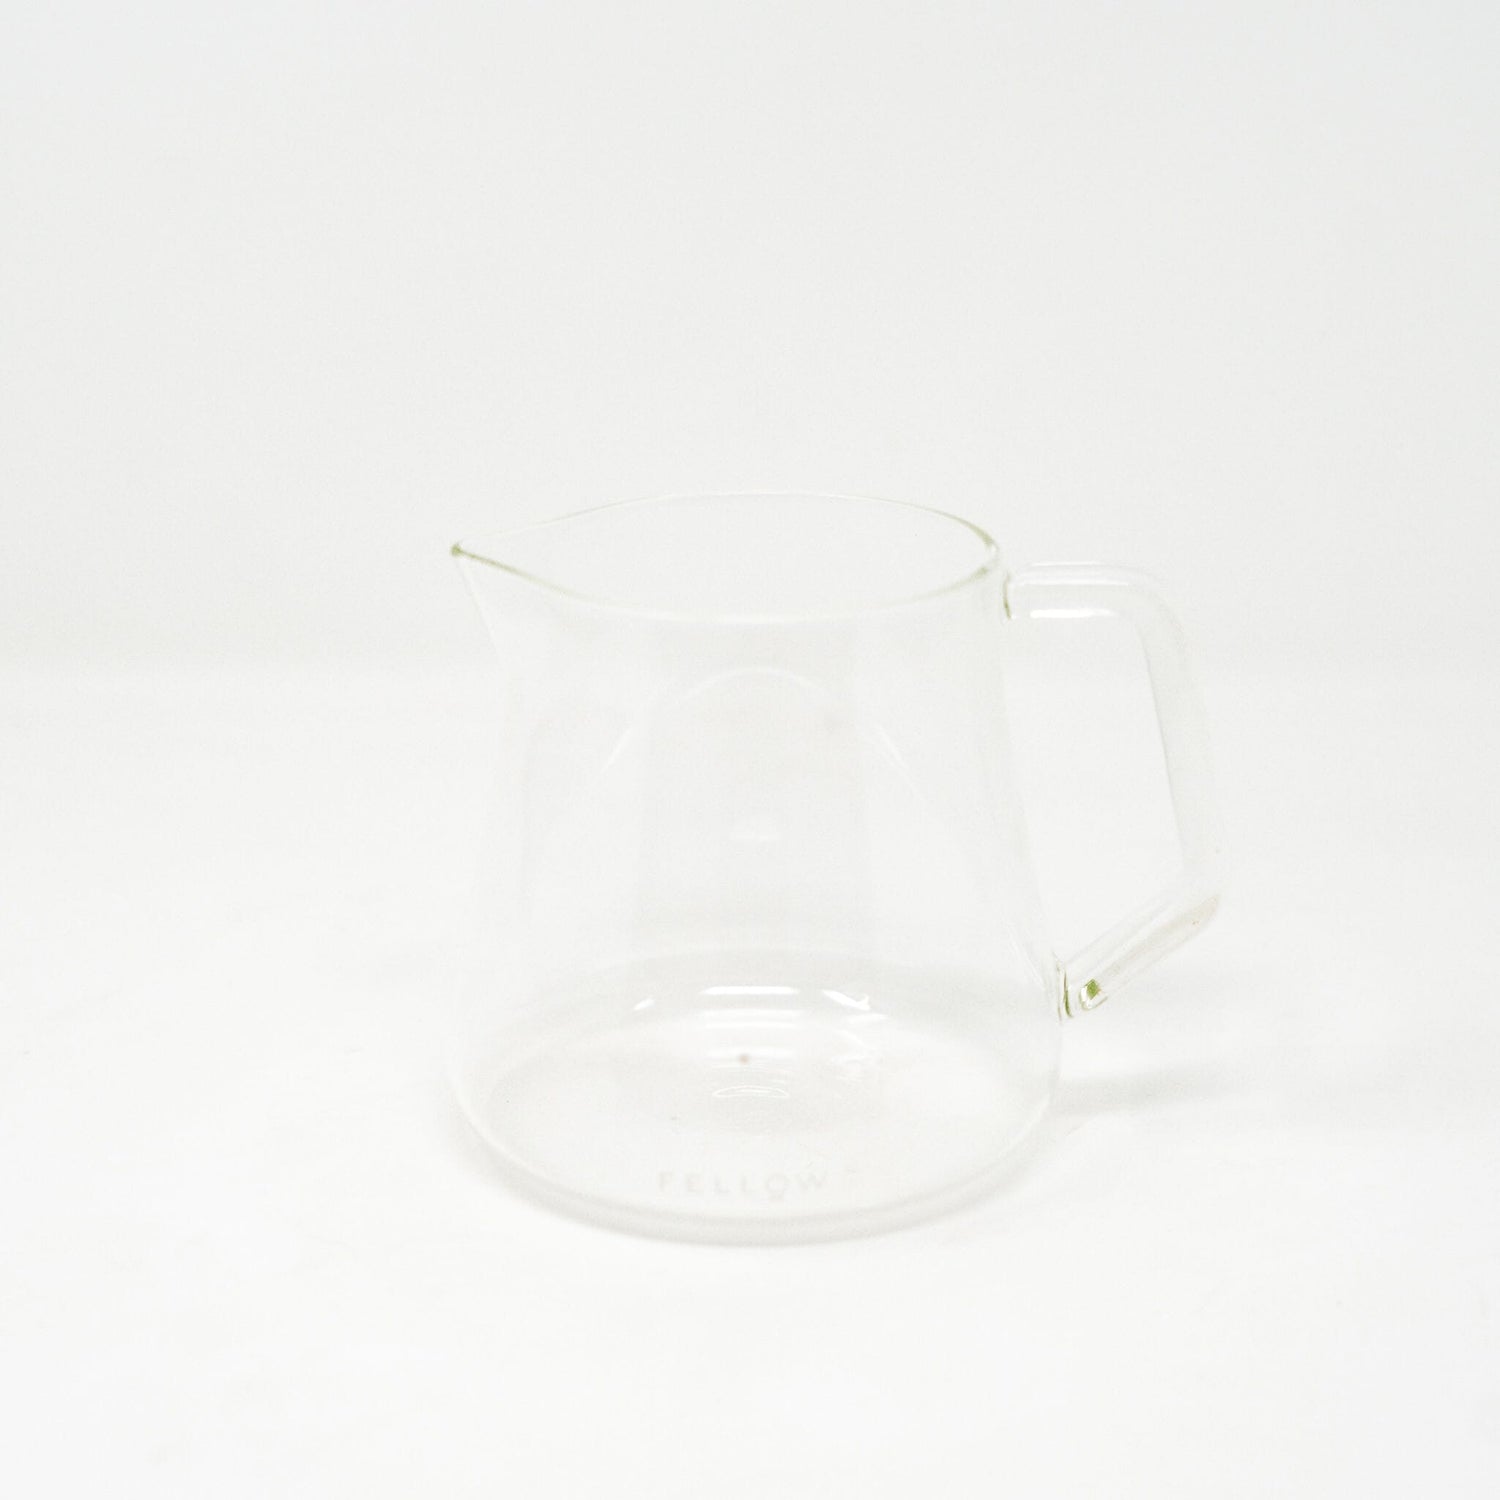 Fellow-Mighty Small Glass Carafe